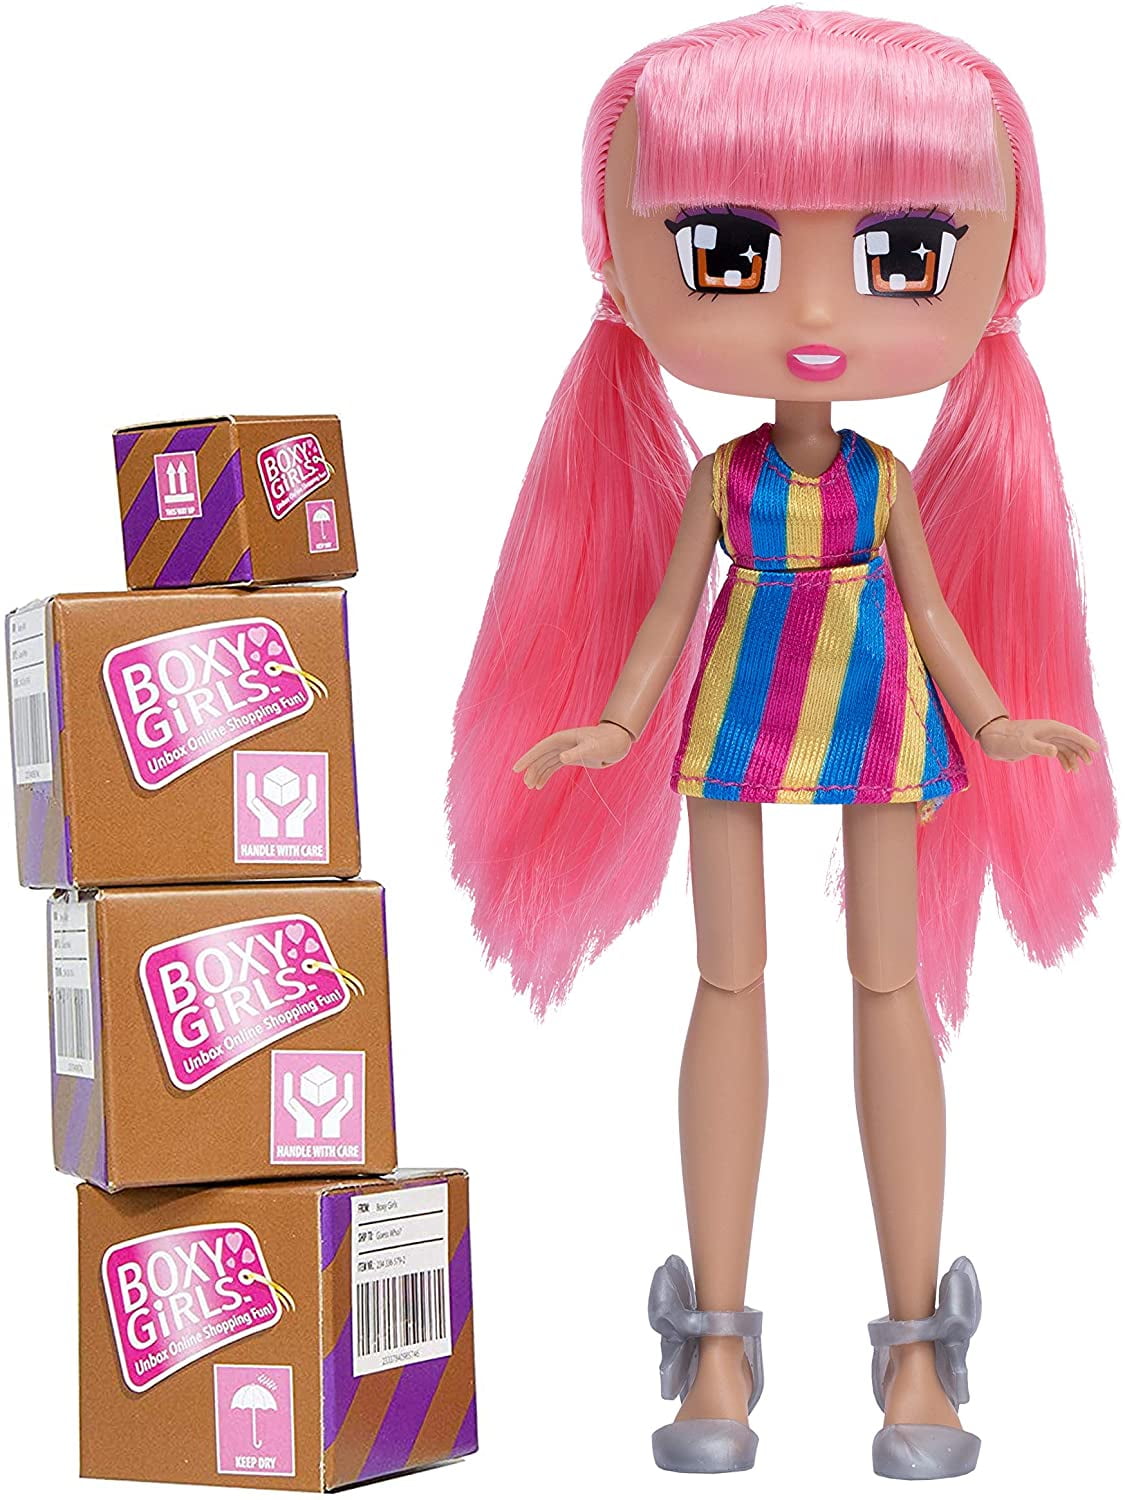 Boxy Girls - Pink Hair Jade Doll - Season (3) Fashion and Clothes Dolls -  (4) Unboxing Boxes Included with Surprise Clothes and Accessories Inside